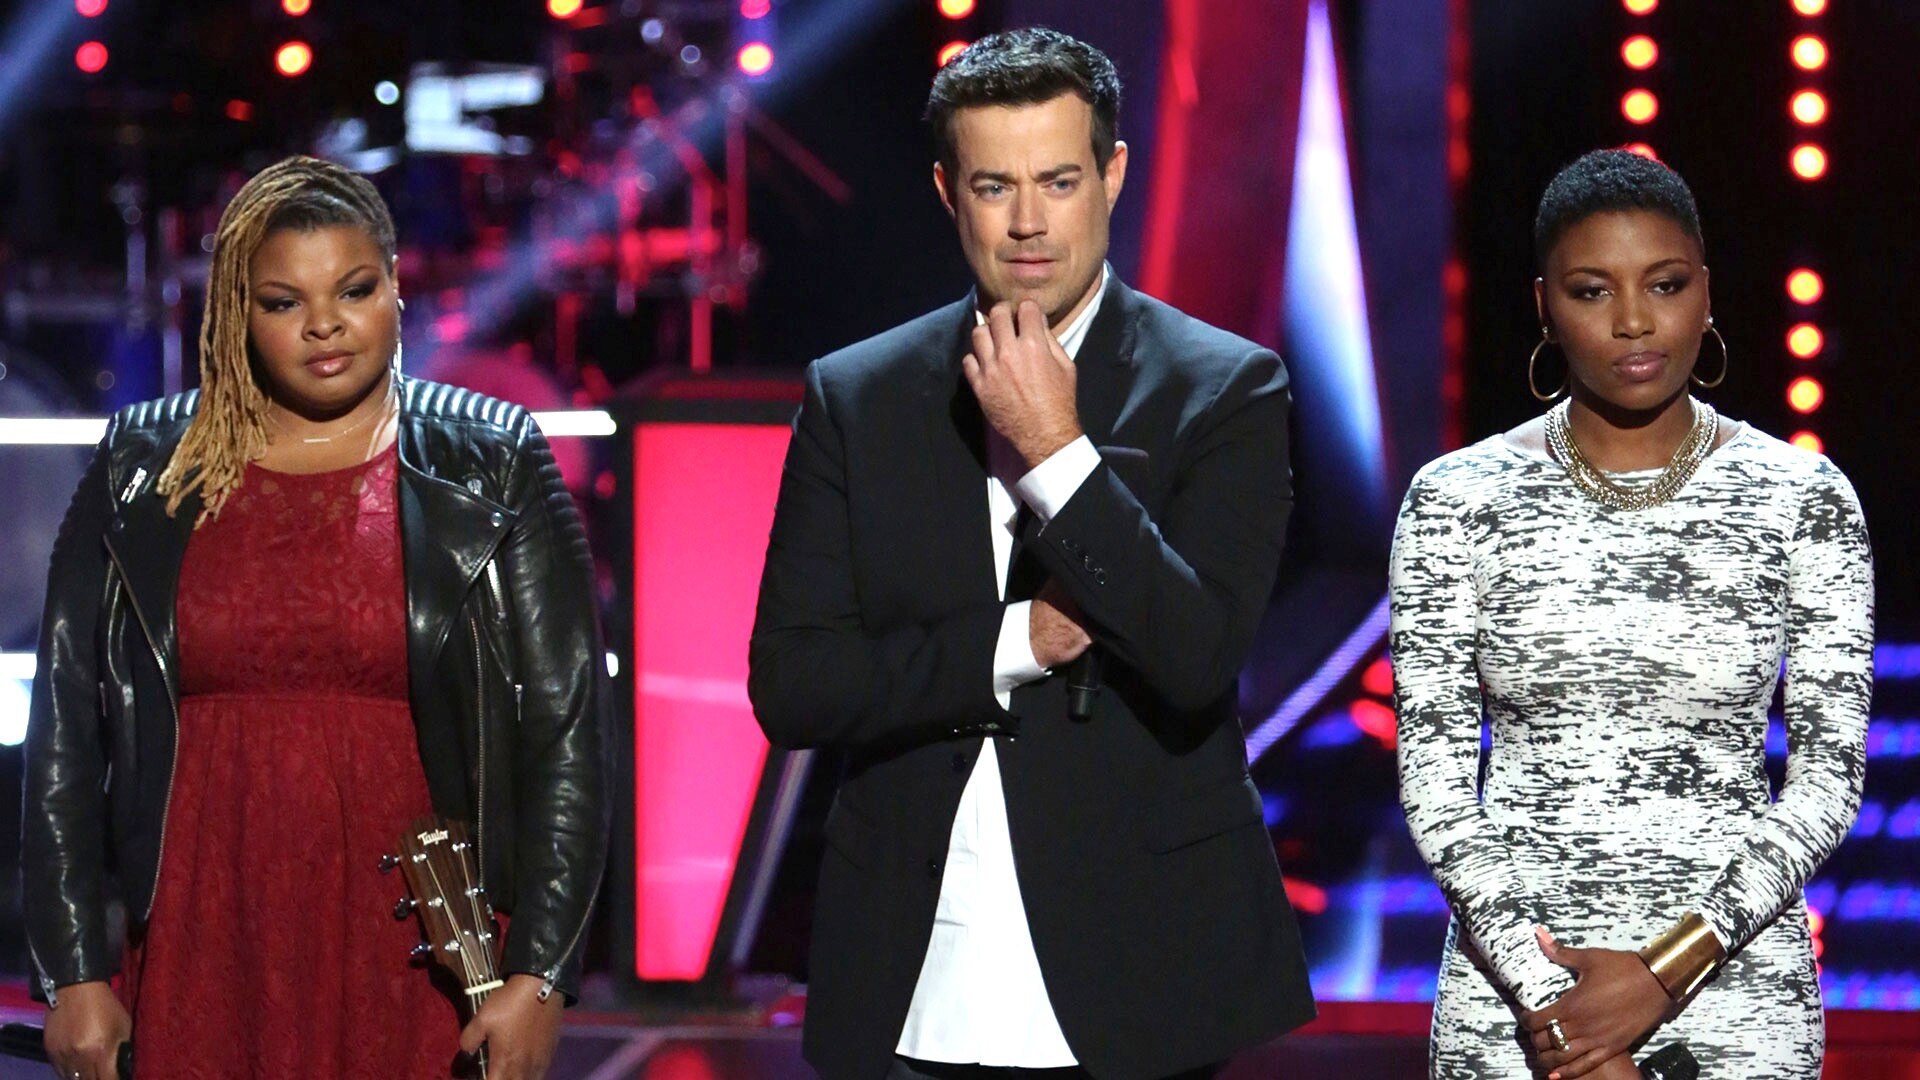 Watch The Voice Episode The Knockouts, Part 2